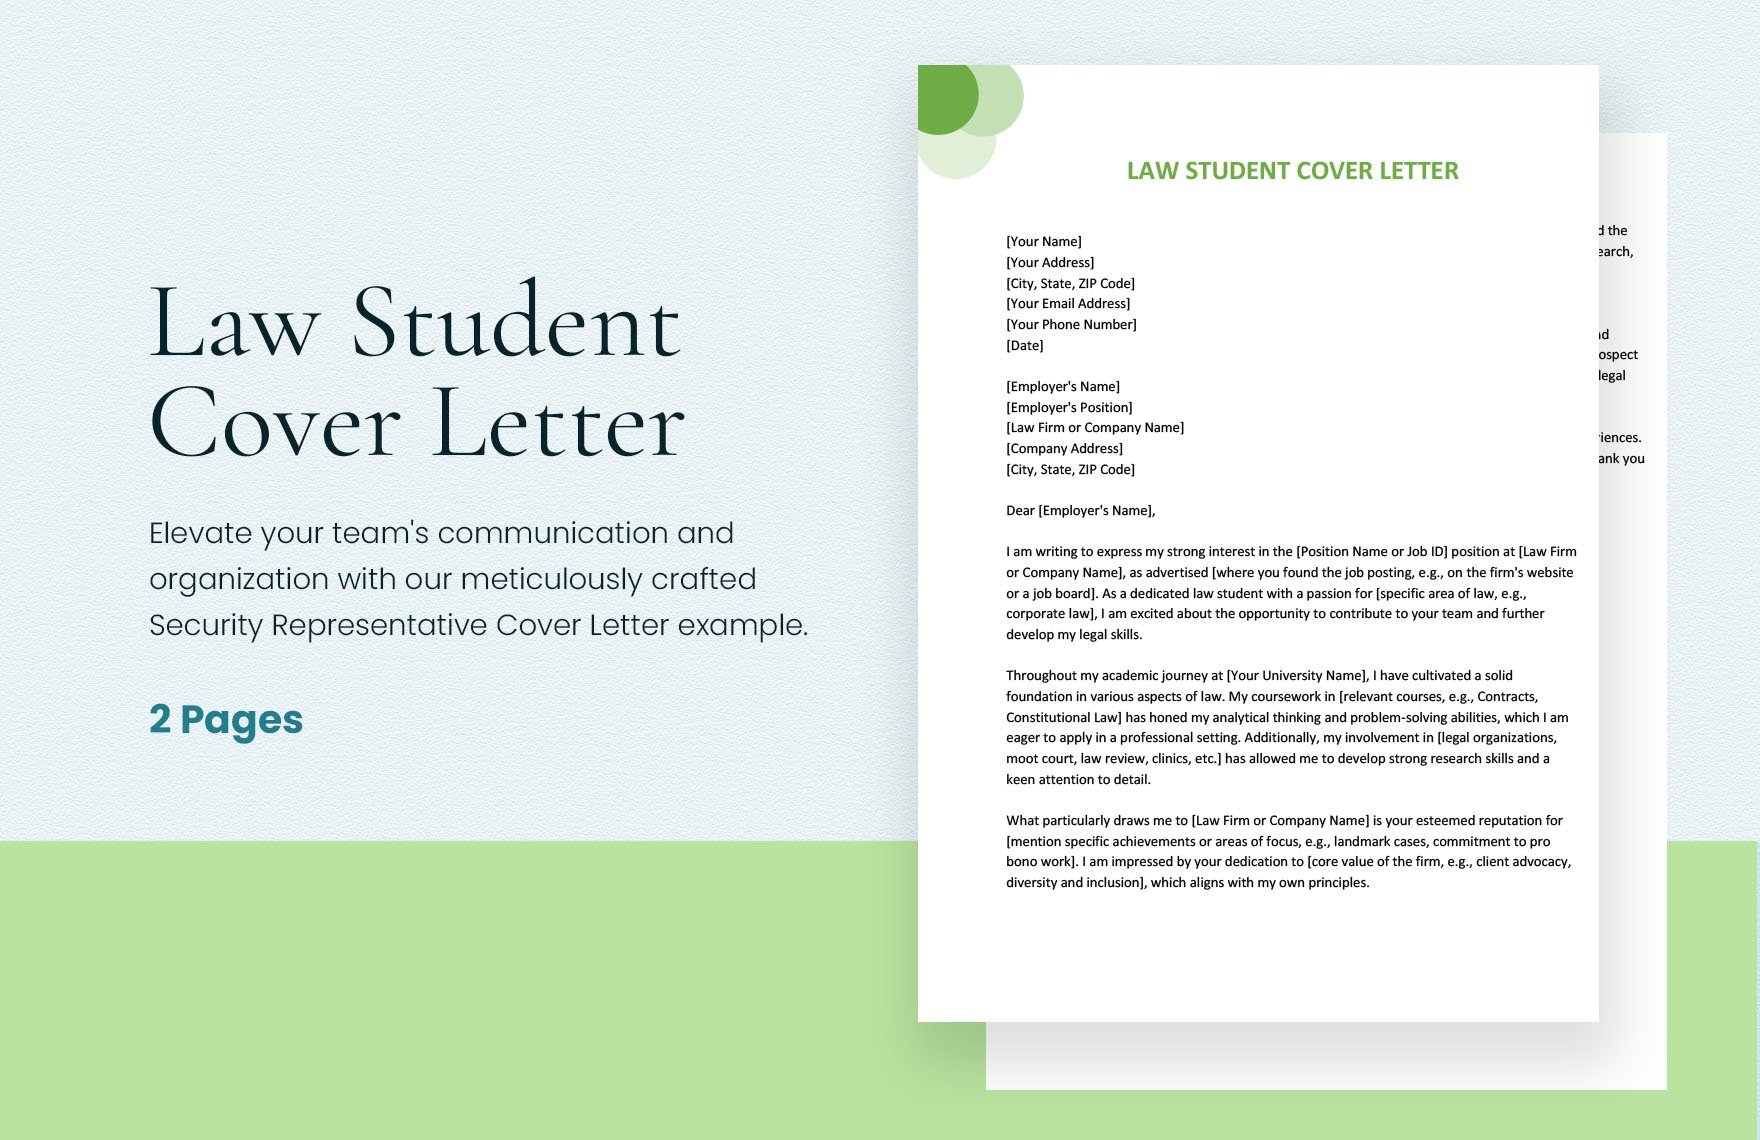 Law Student Cover Letter in Word, Google Docs